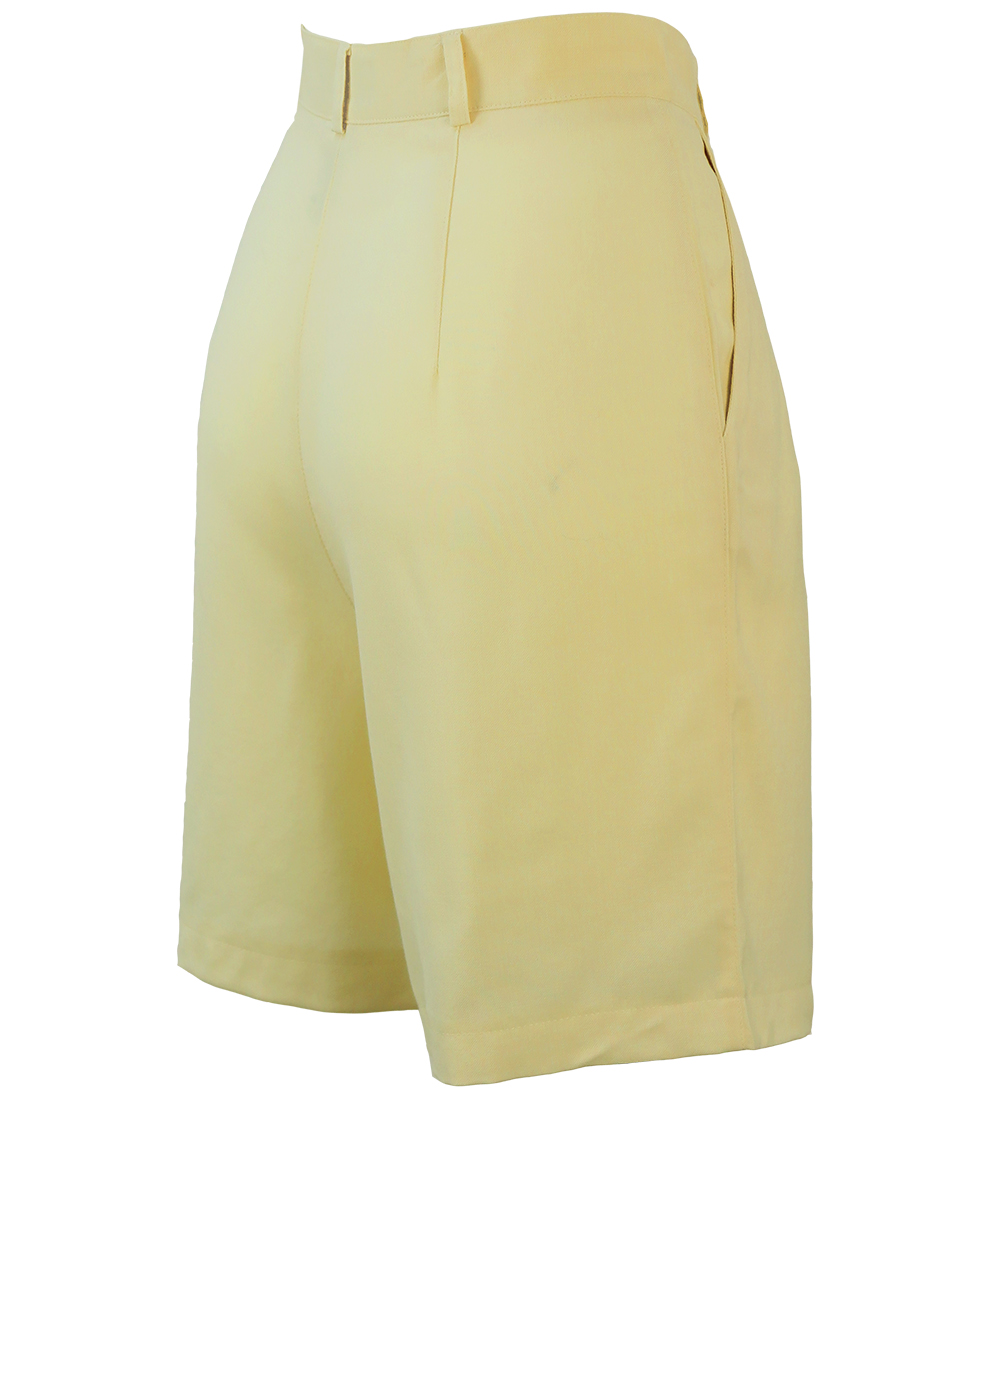 Max Mara 'Penny Black' Pleat Fronted Cream Shorts - S/M | Reign Vintage